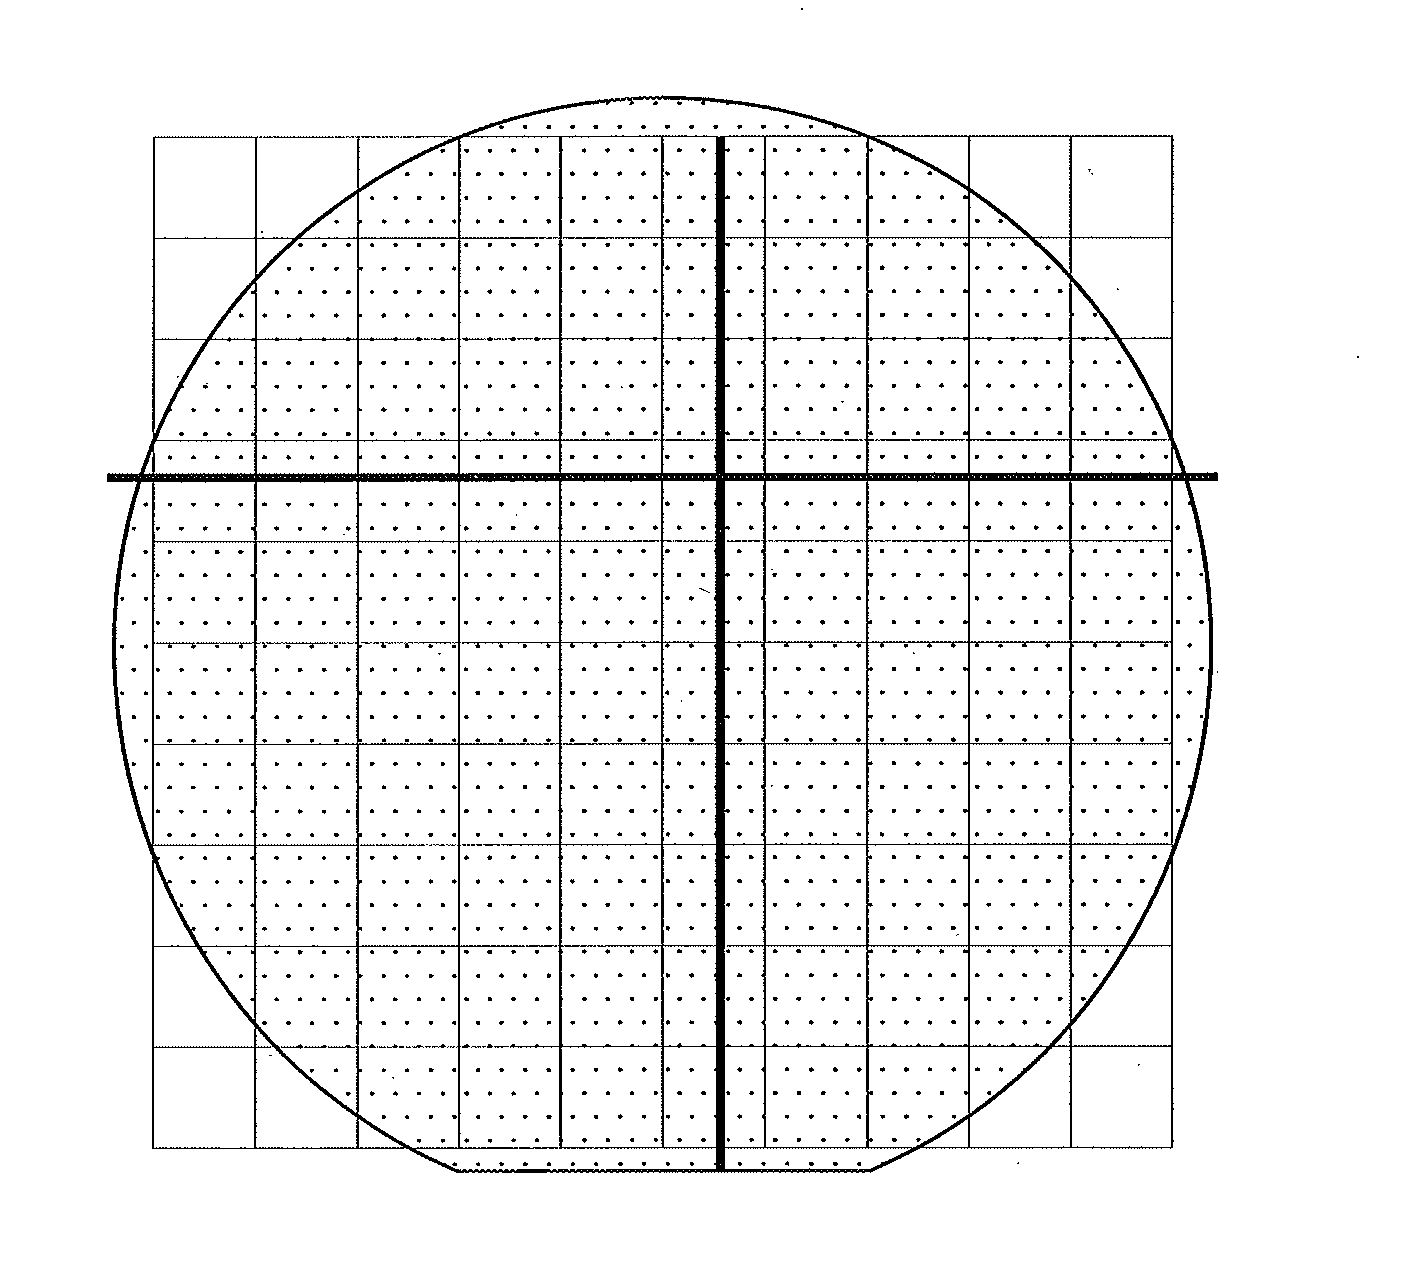 Method for fabricating defect free silicon mold insert